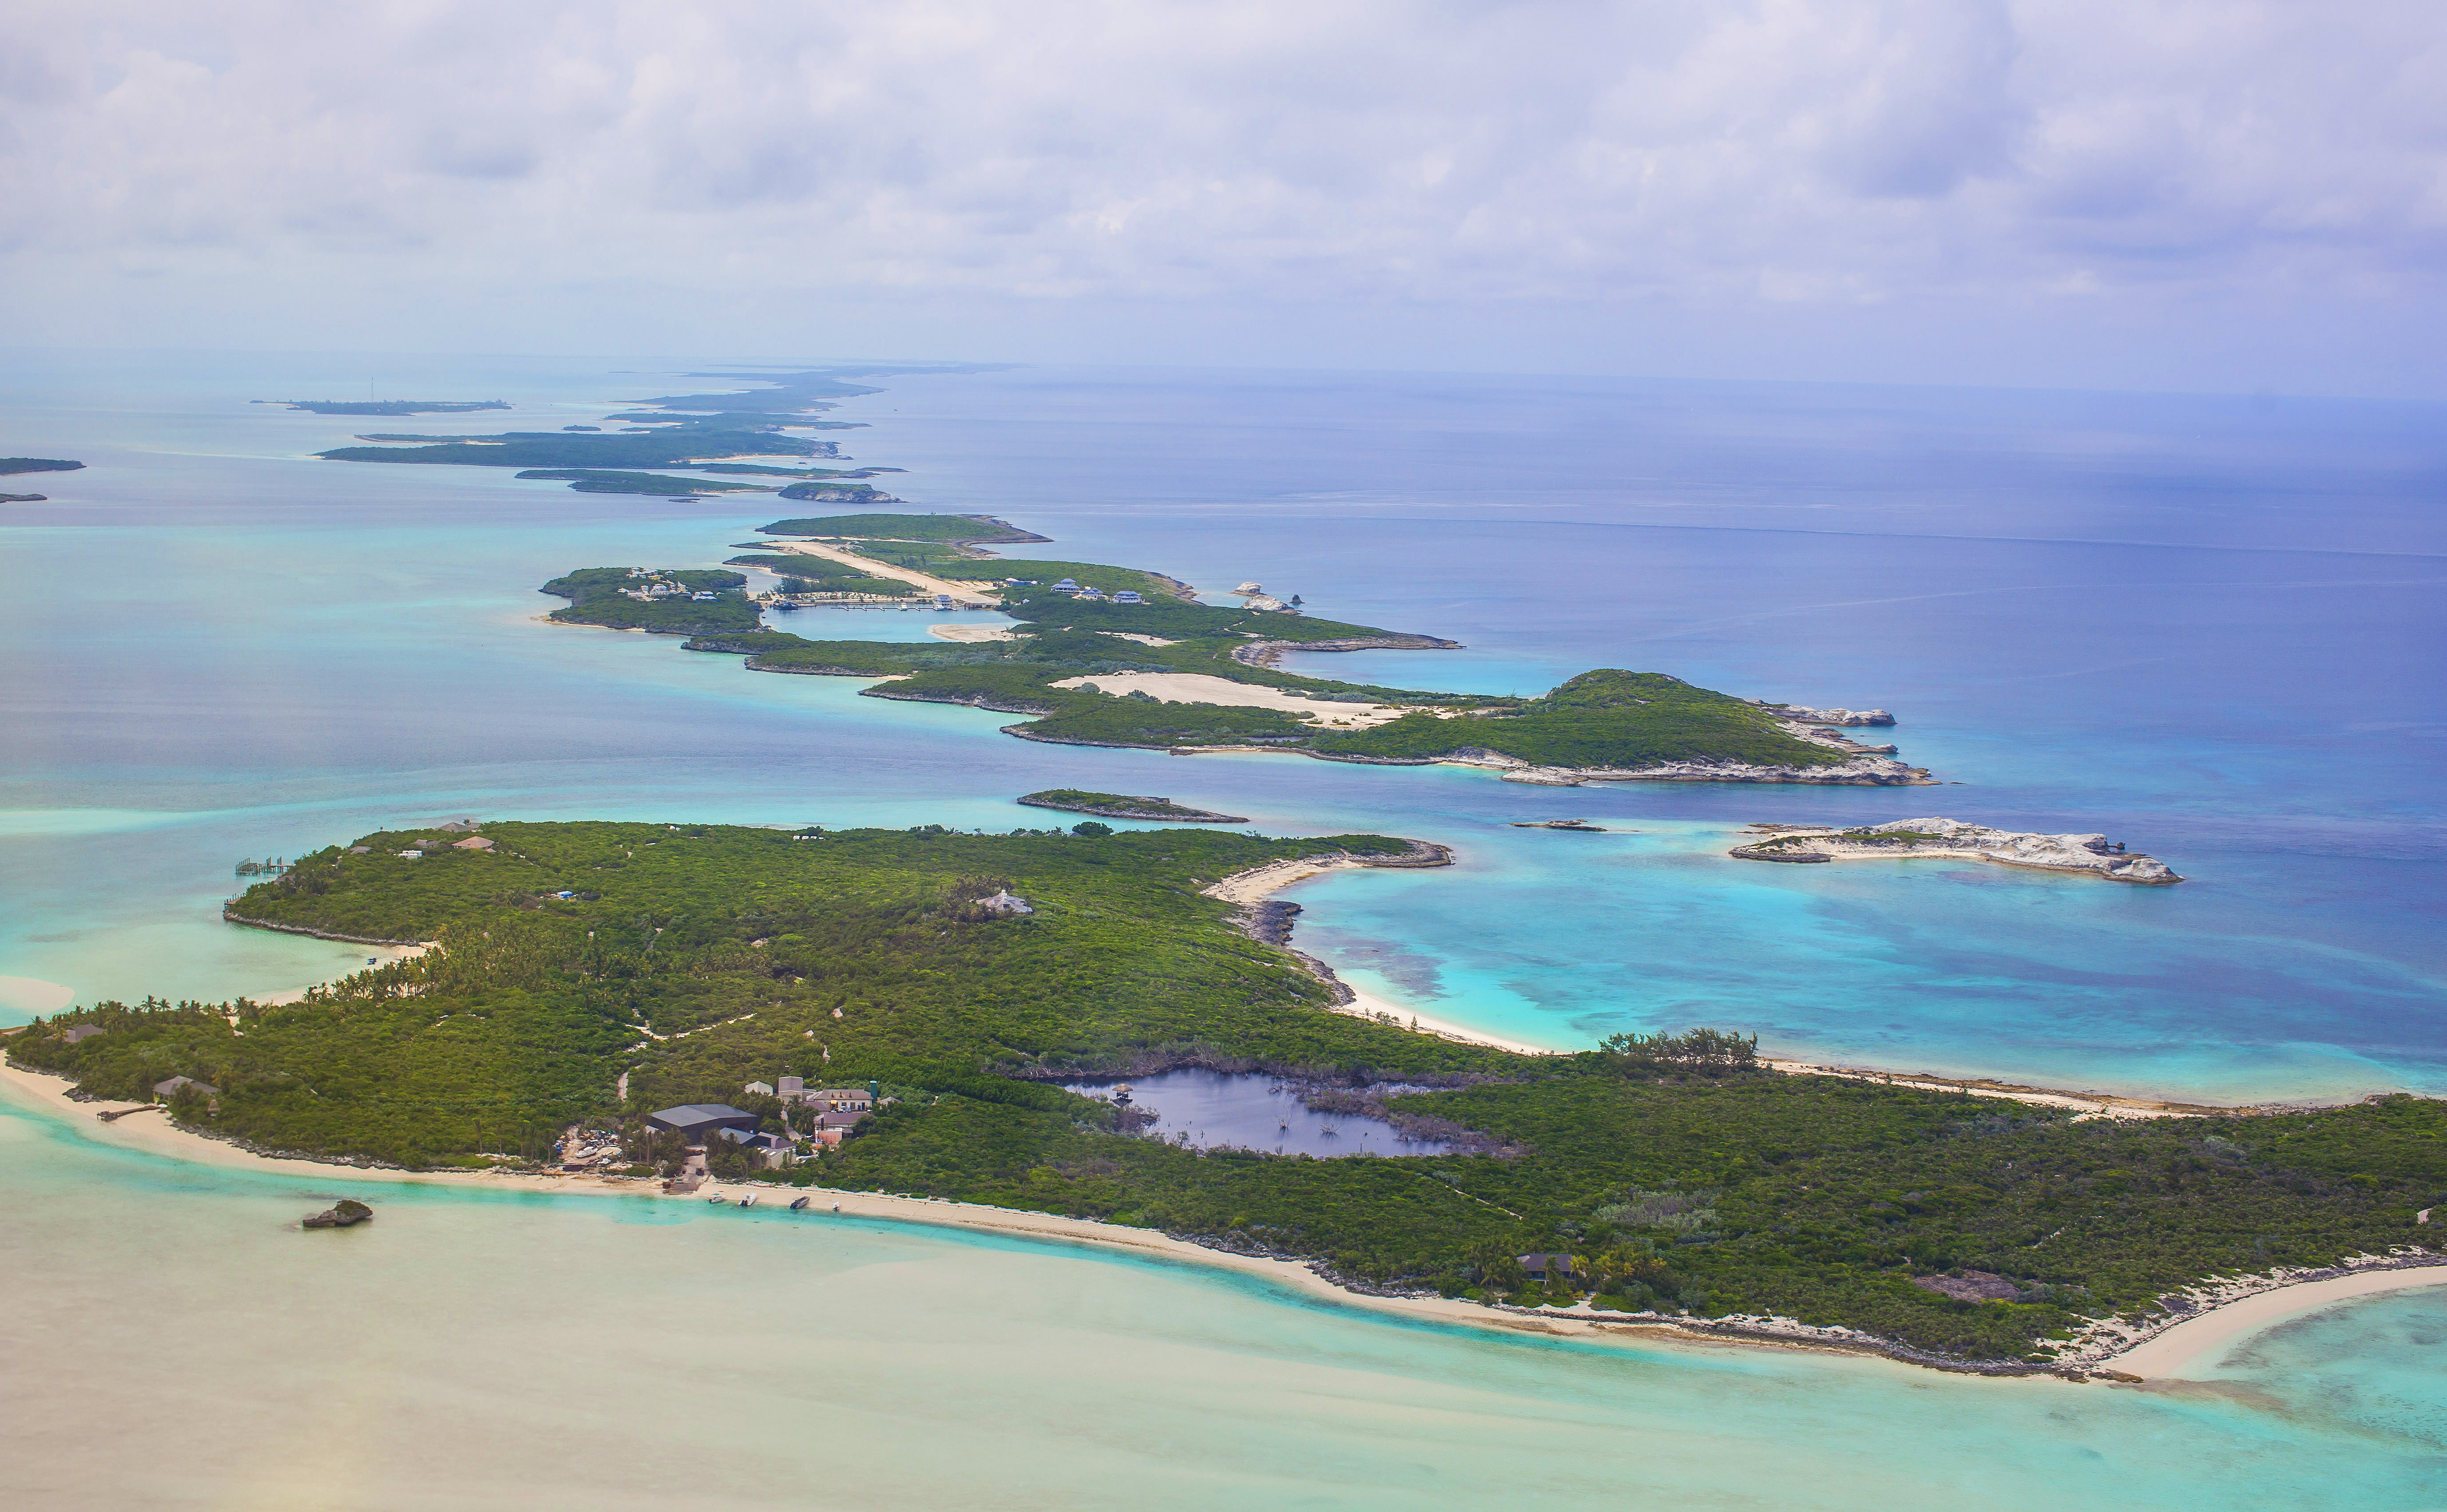 How to choose an island in the Bahamas